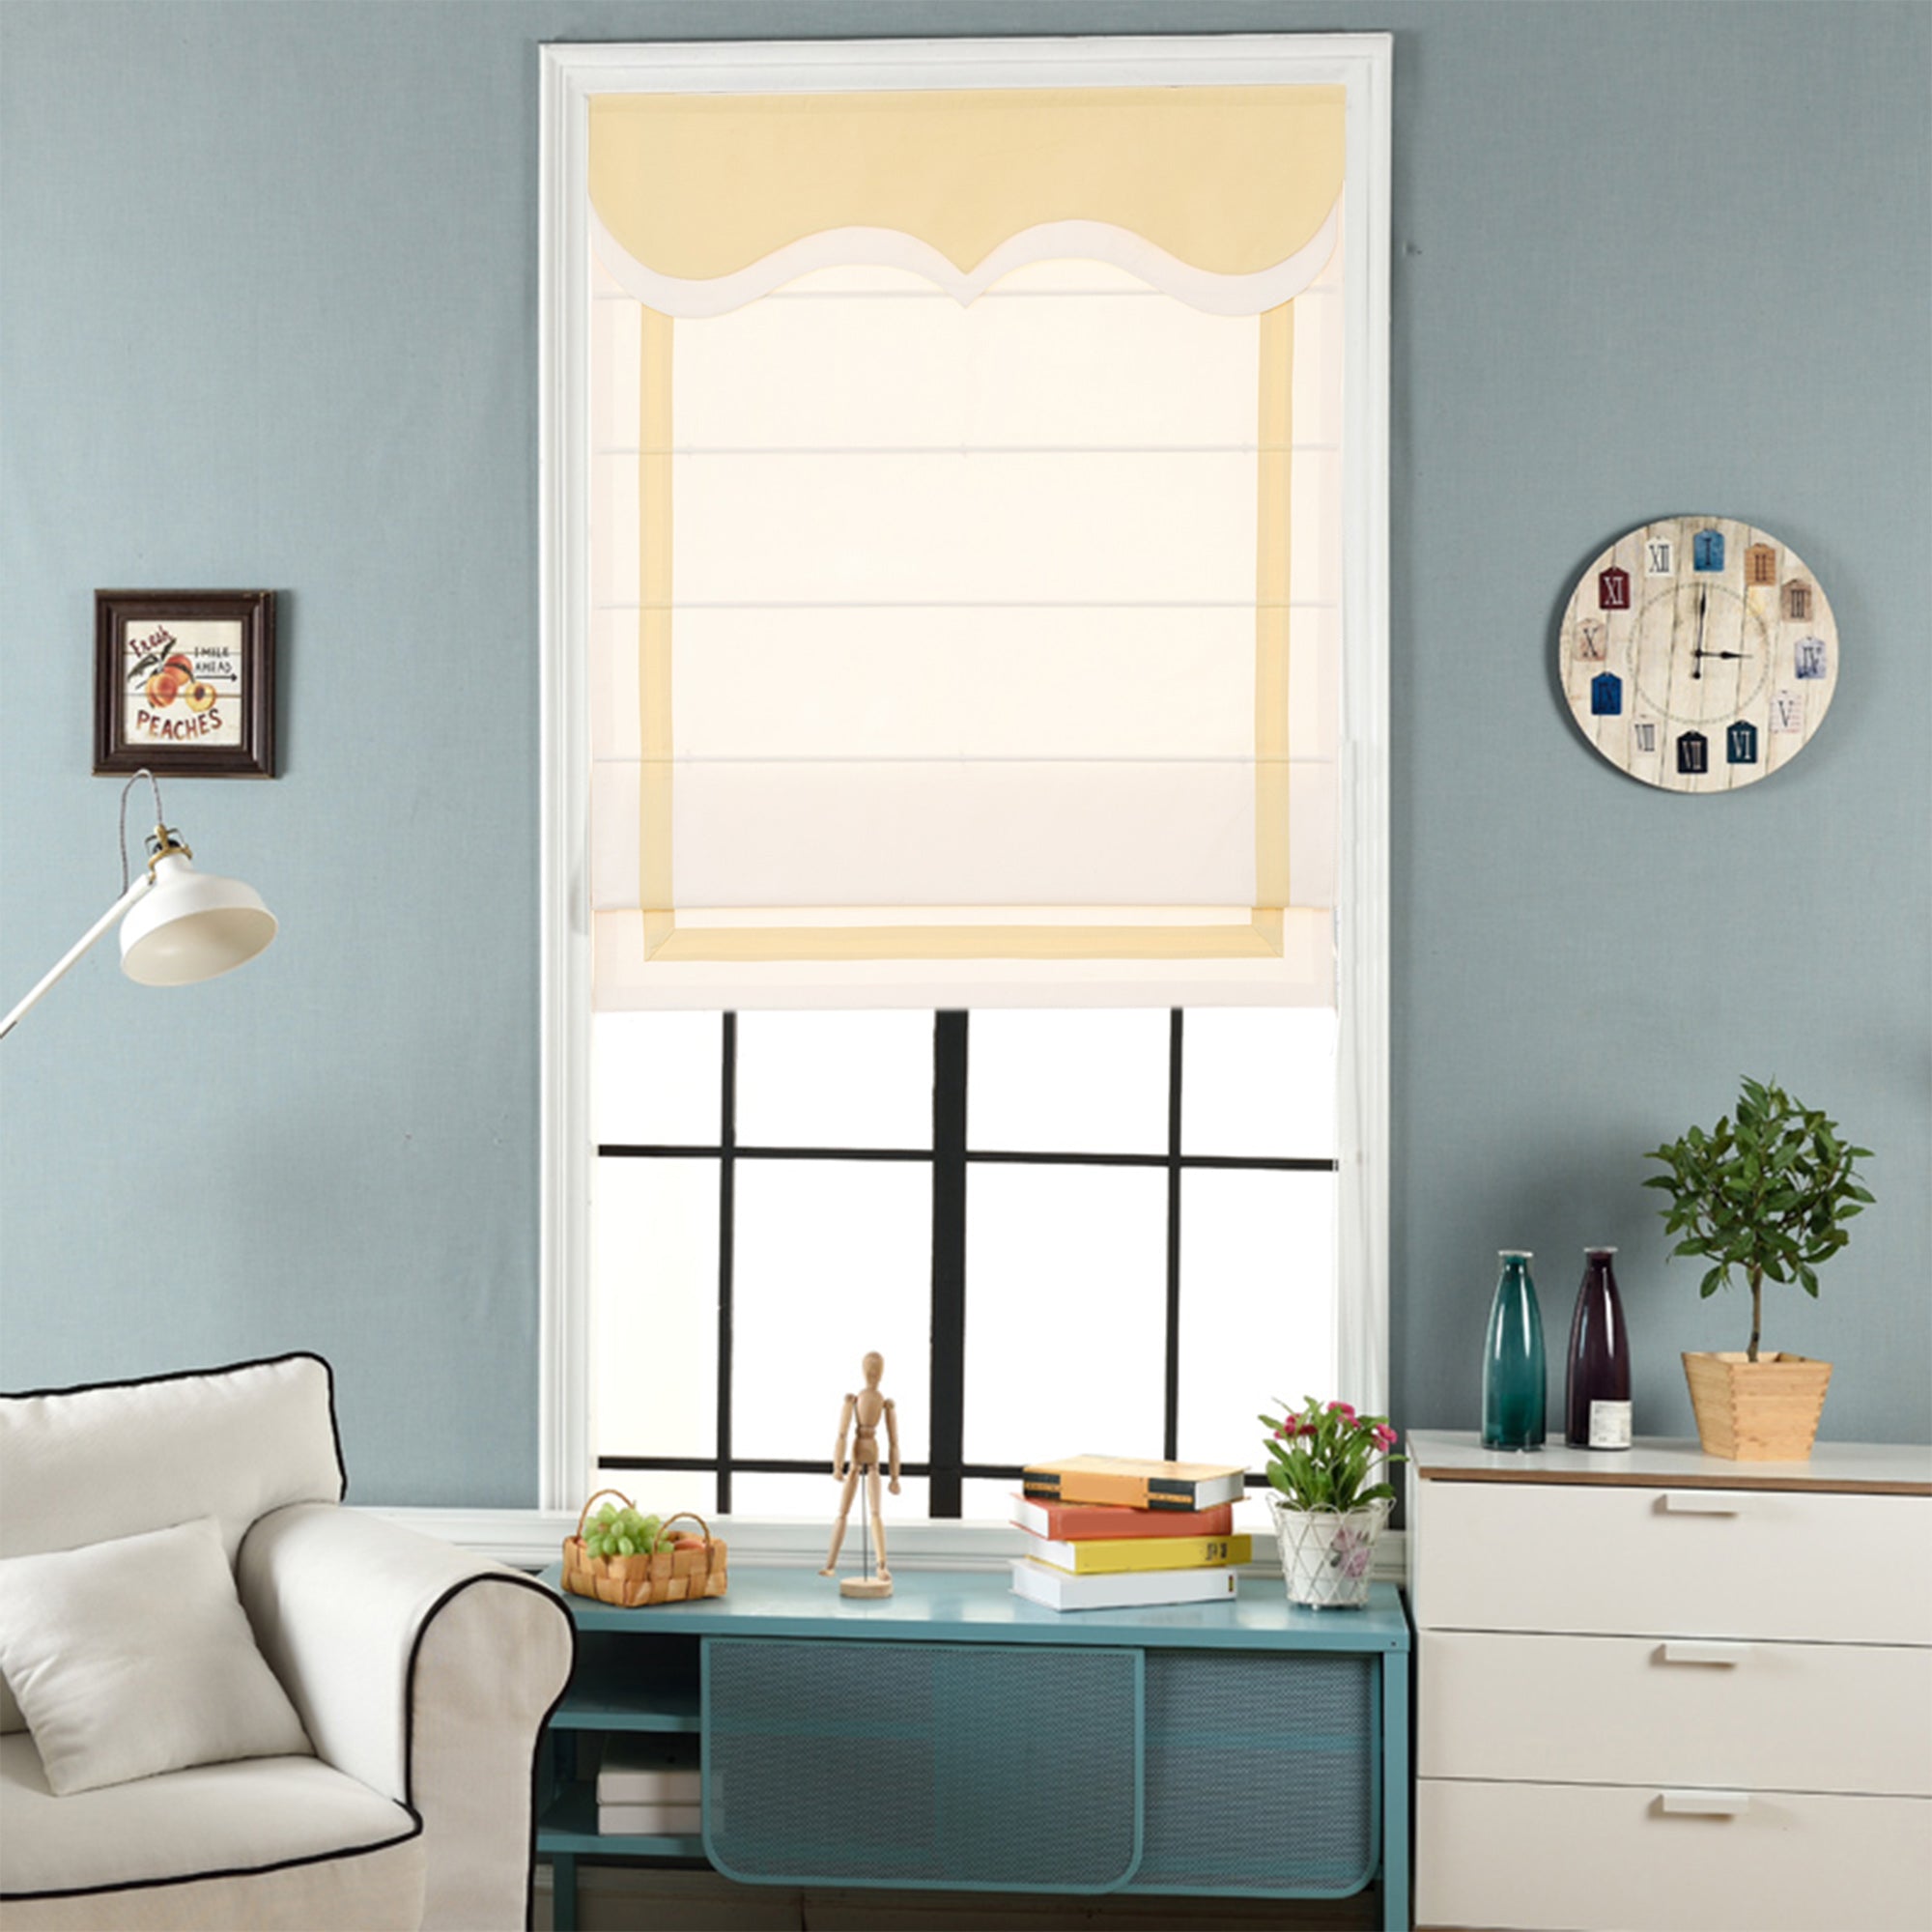 Quick Fix Washable Roman Window Shades Flat Fold with Valance, SG-007 White with Yellow Trim